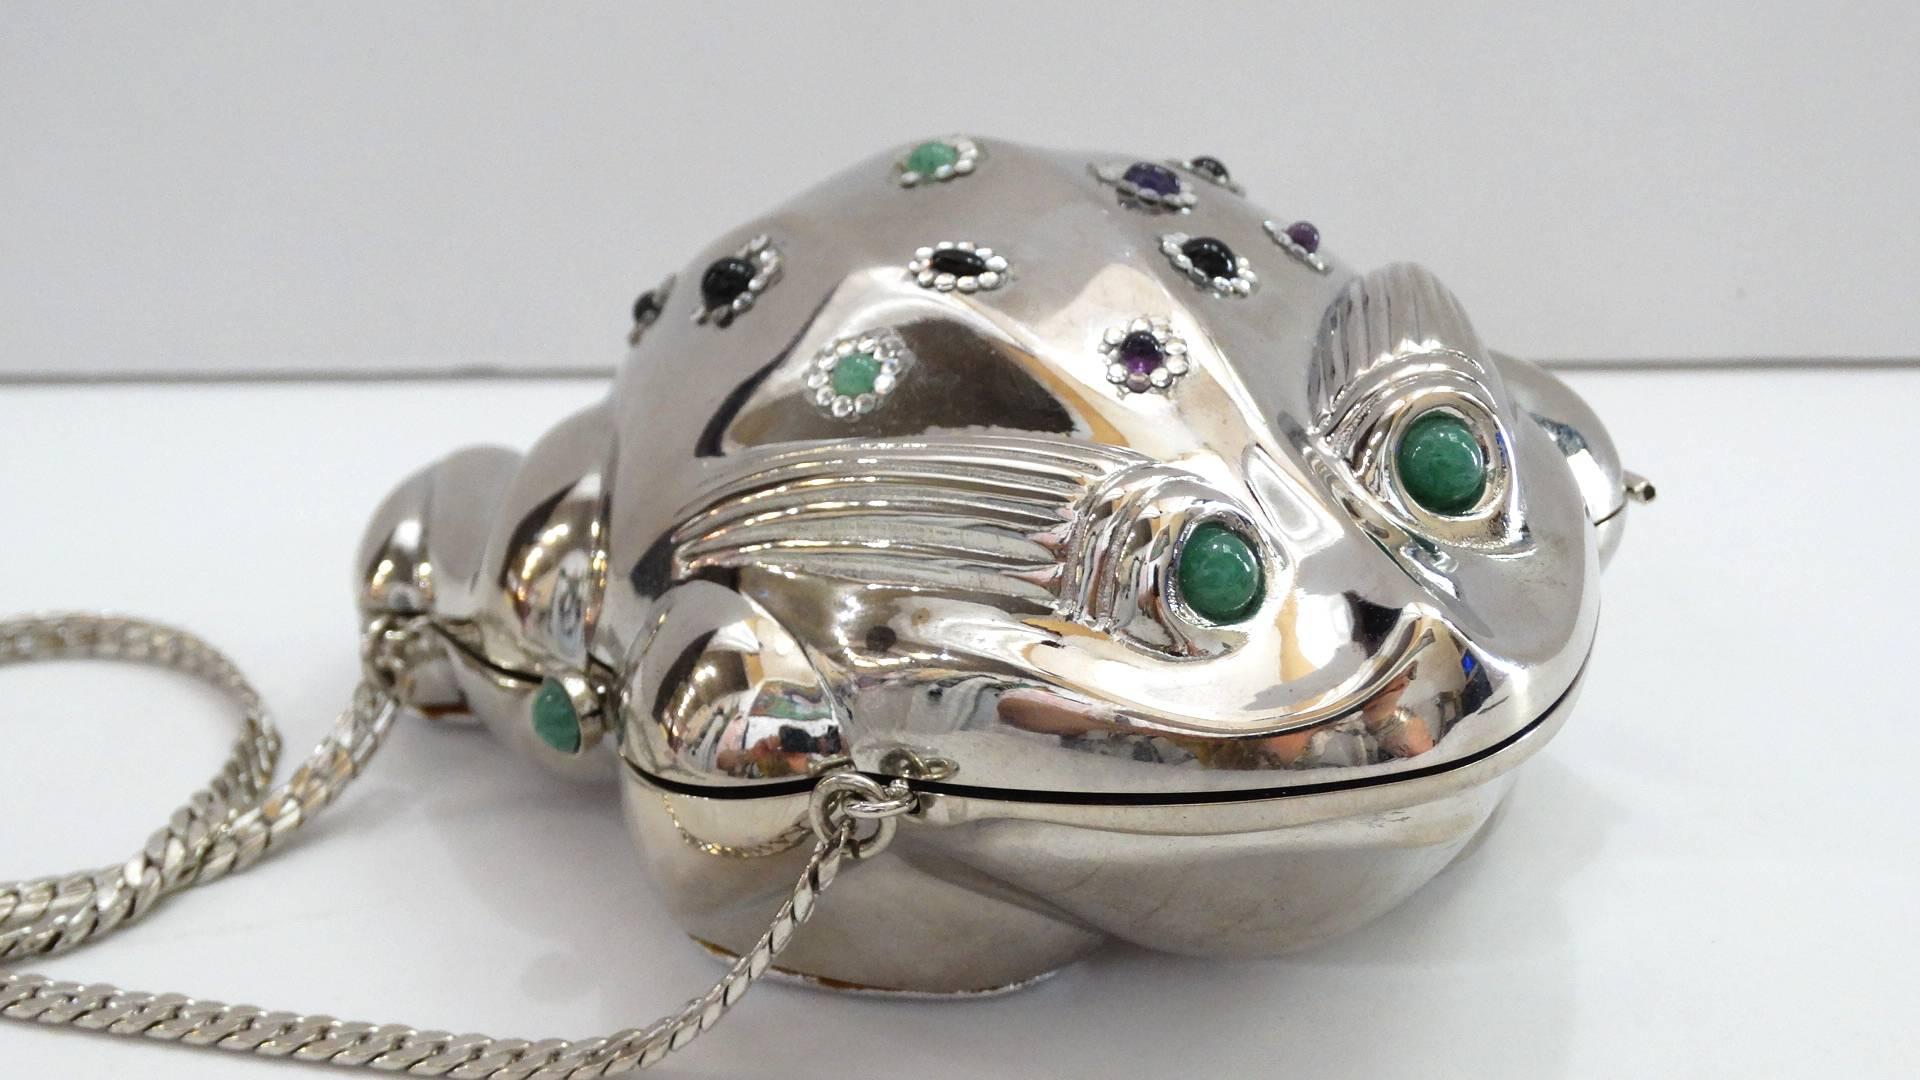 No need to kiss anymore frogs- your price charming has arrived (in bag form, that is!) Add some novelty to your evening looks with our amazing 1980s Judith Leiber silver bullfrog bag! Glossy silver metal bullfrog accented with green gem spots and